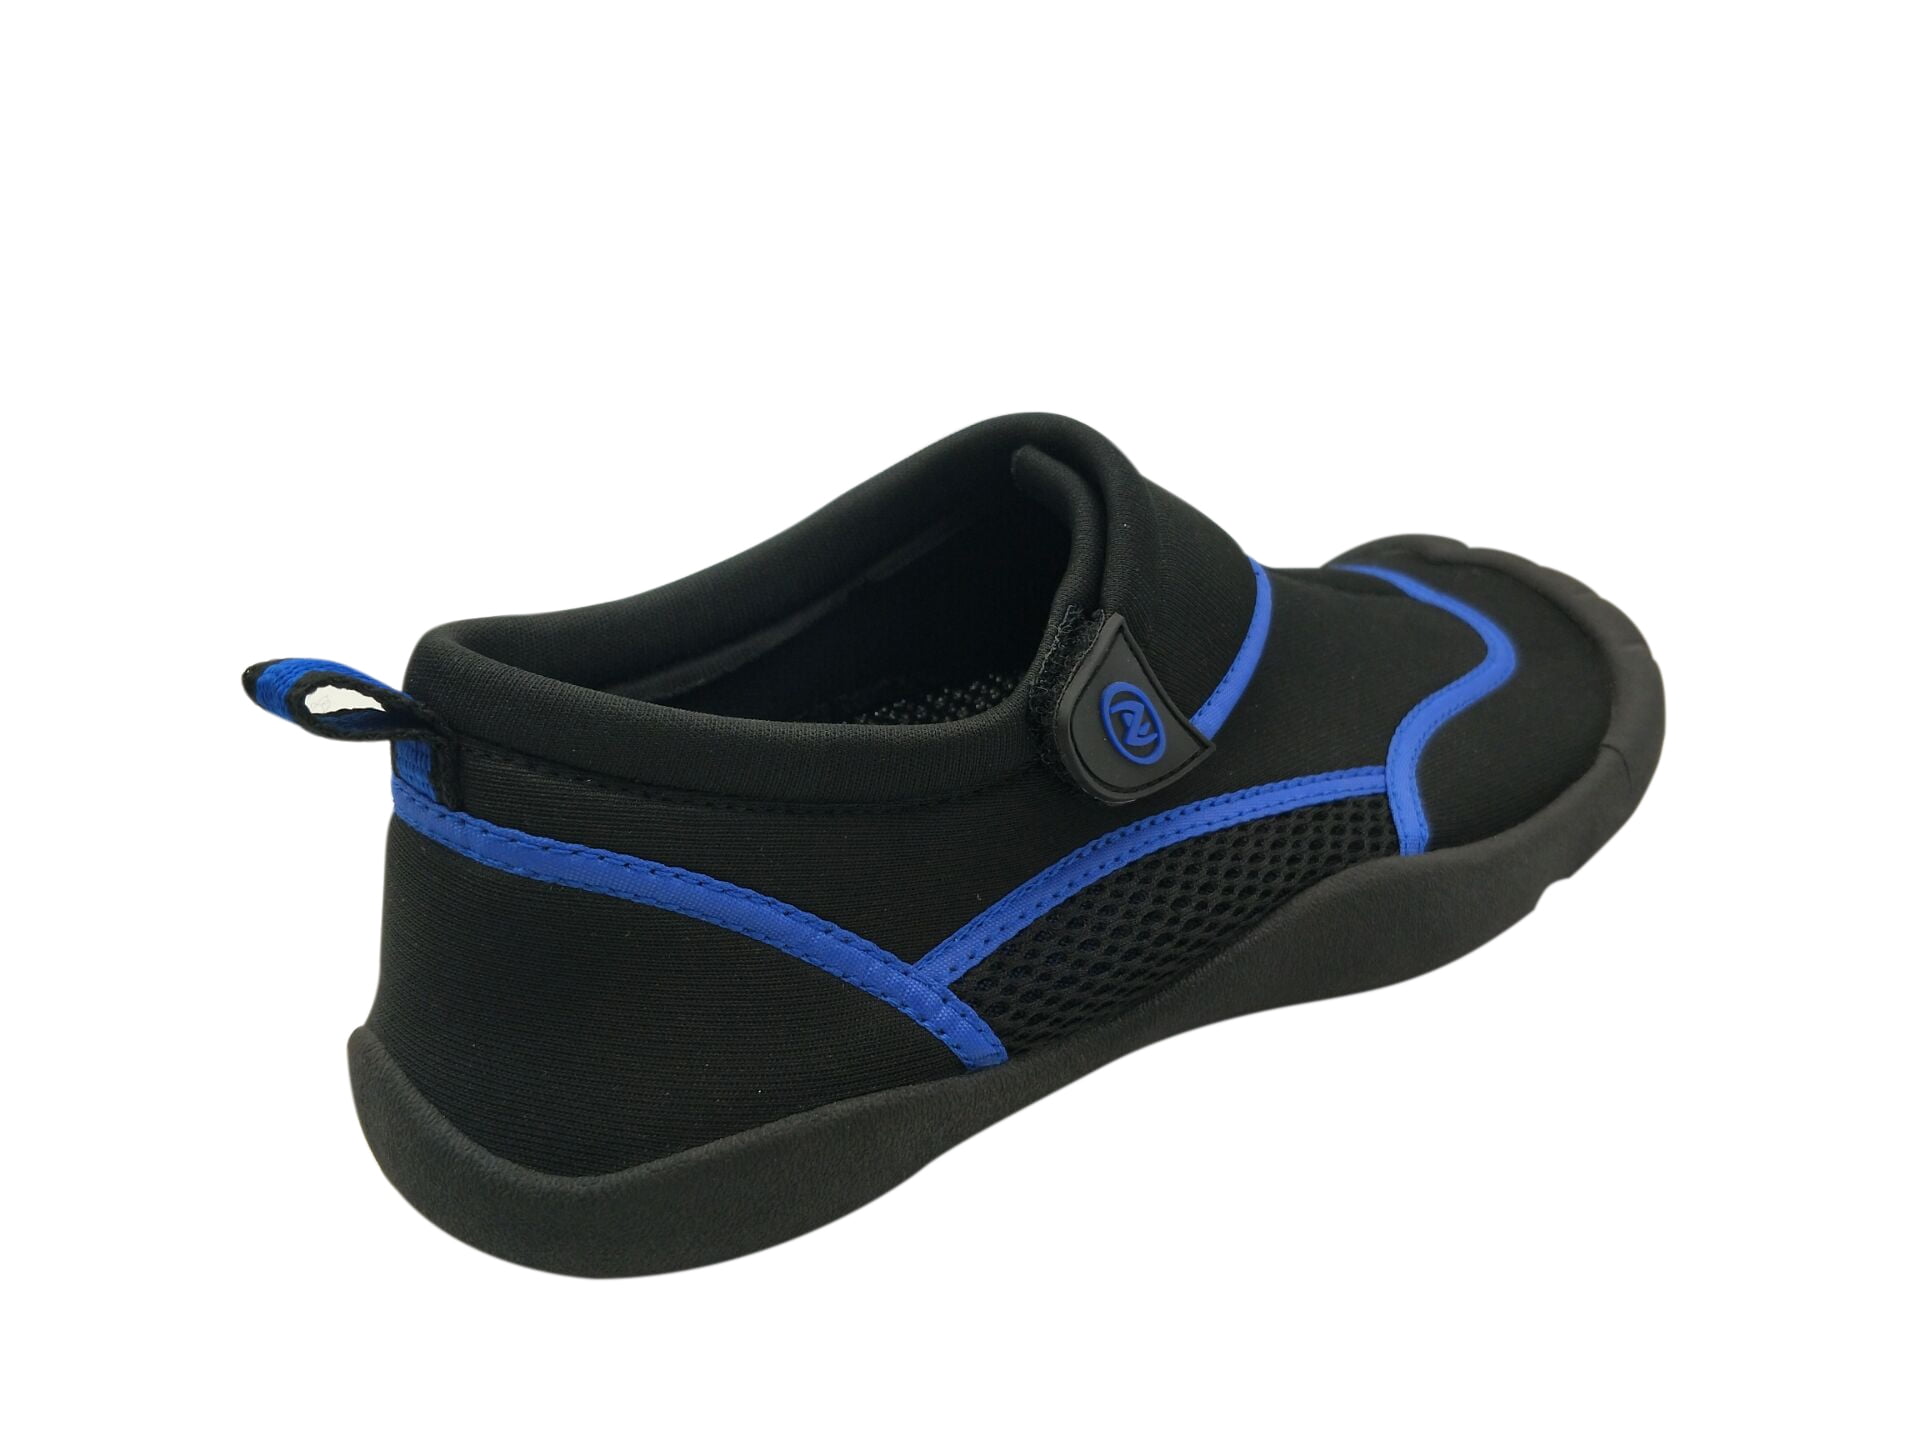 athletic works water shoes